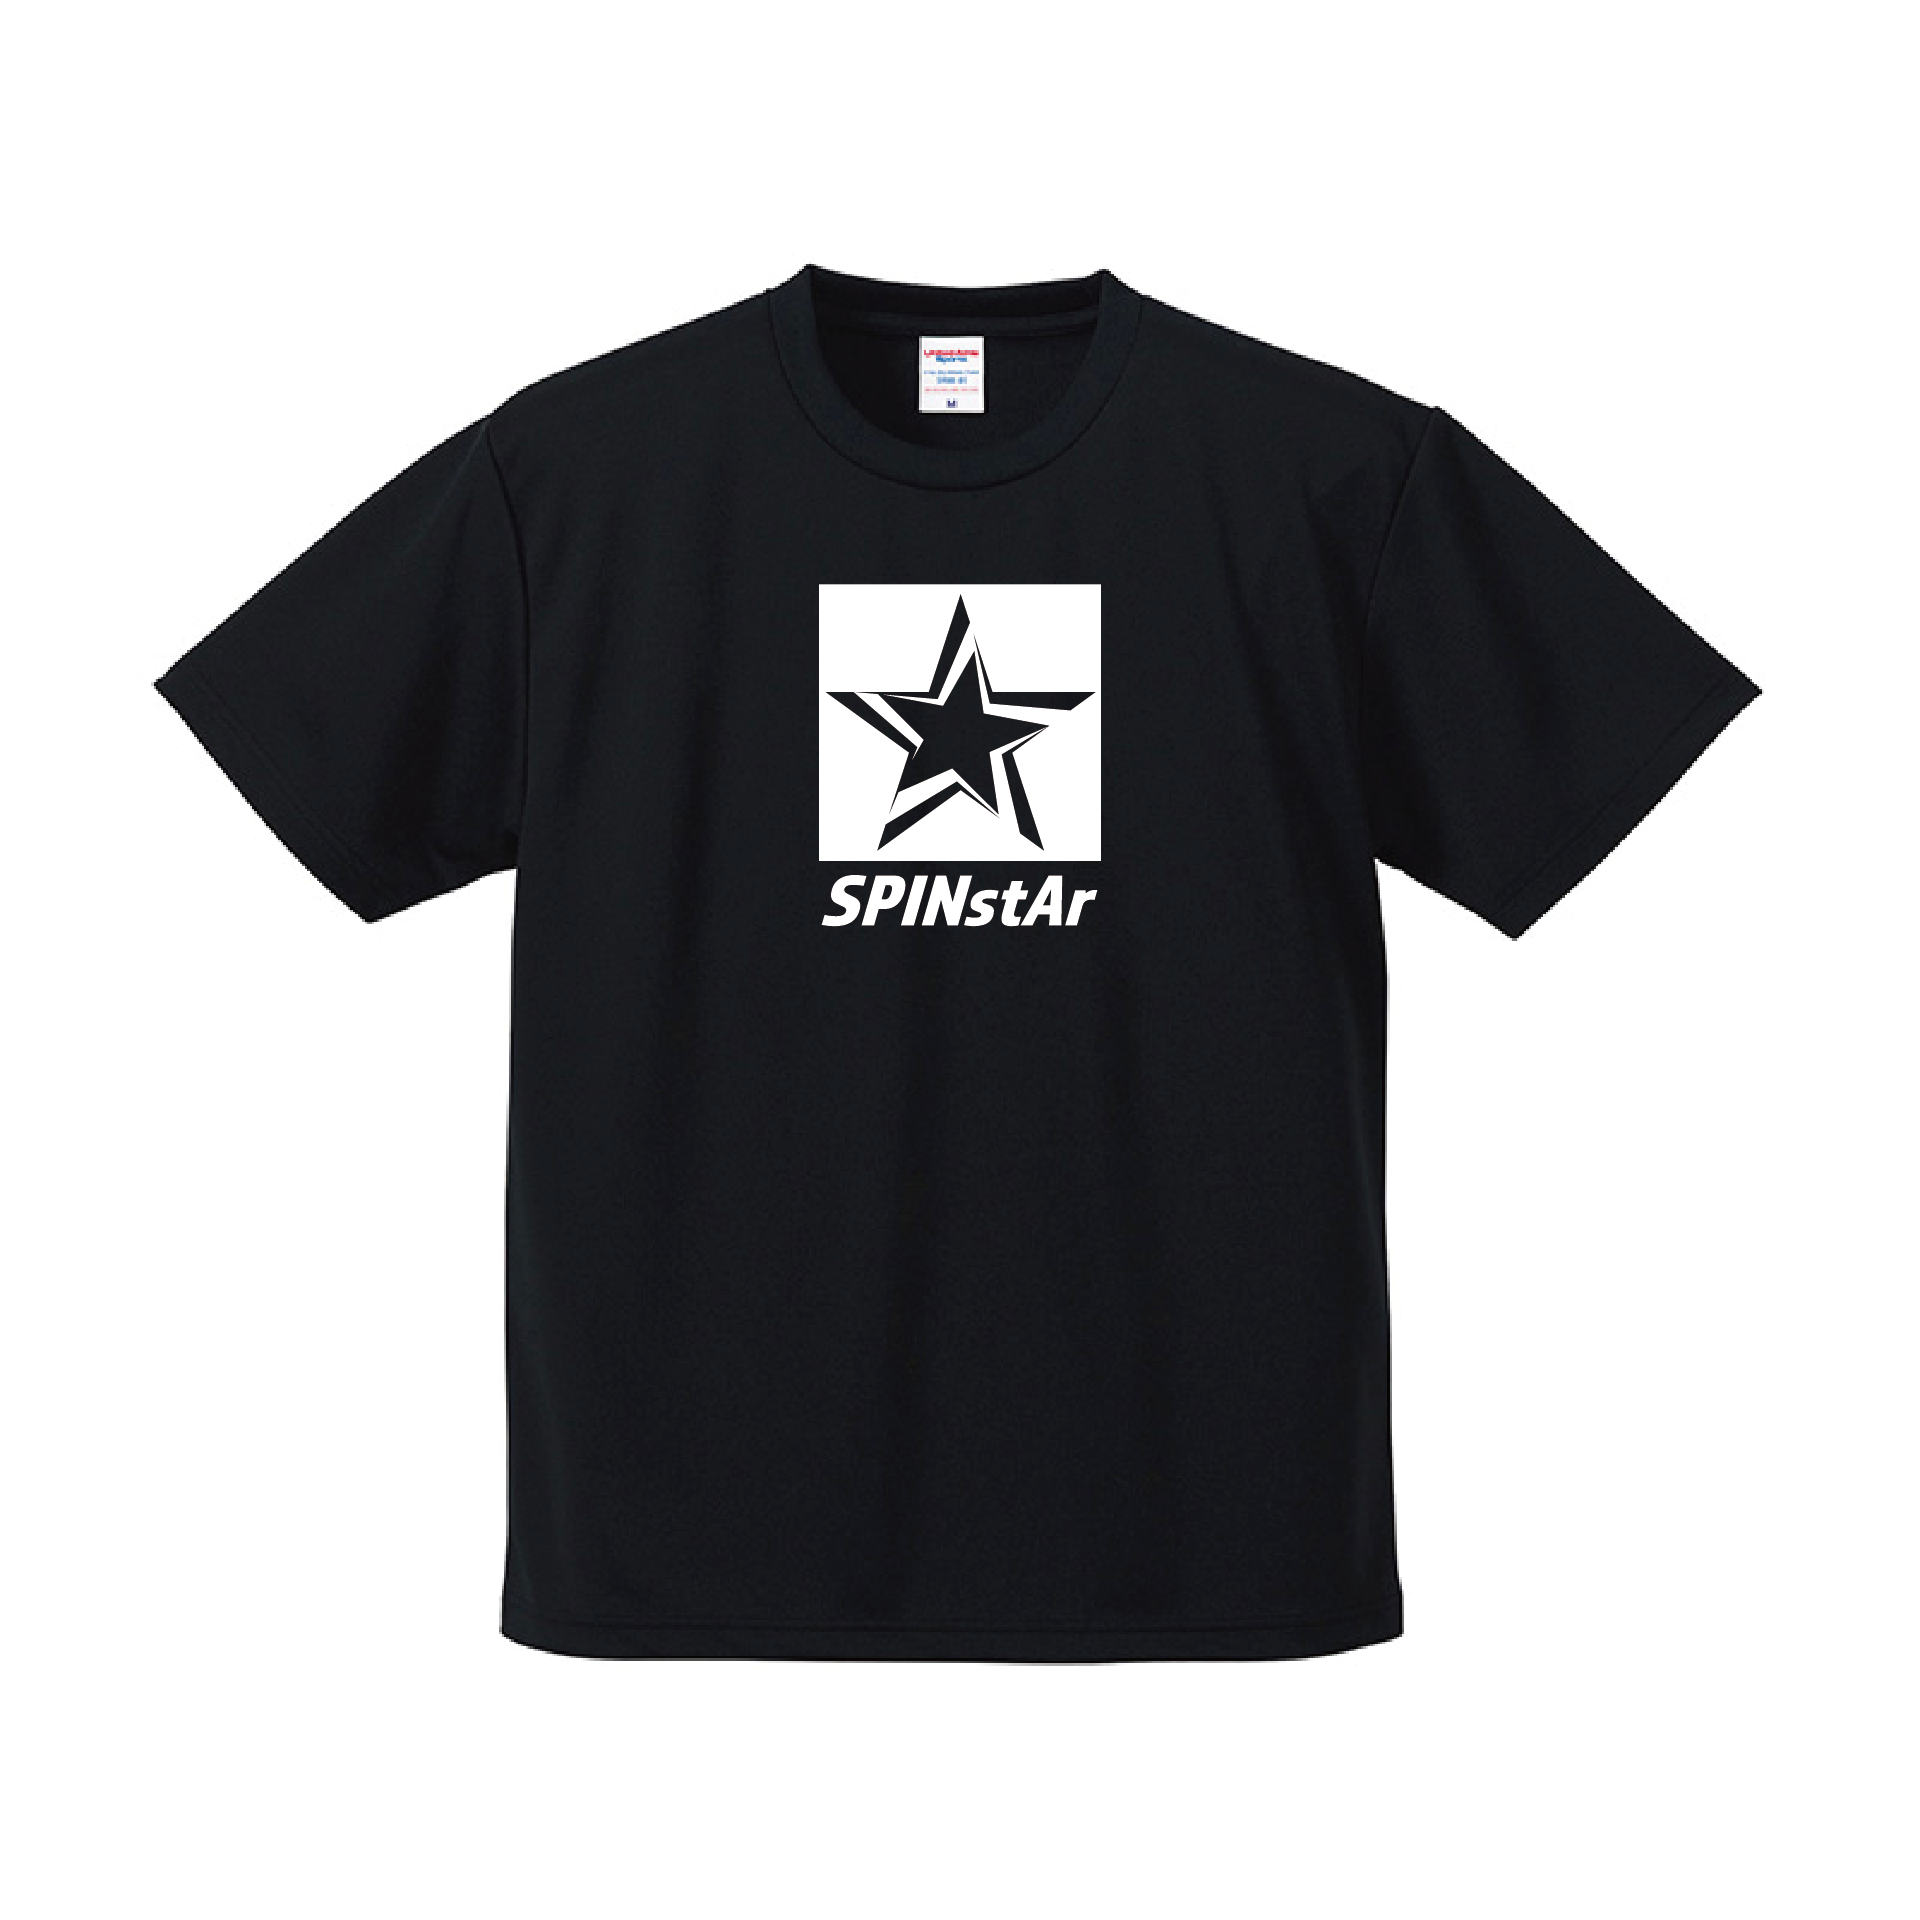 SPIN stAr T-shirts - SPIN stAr